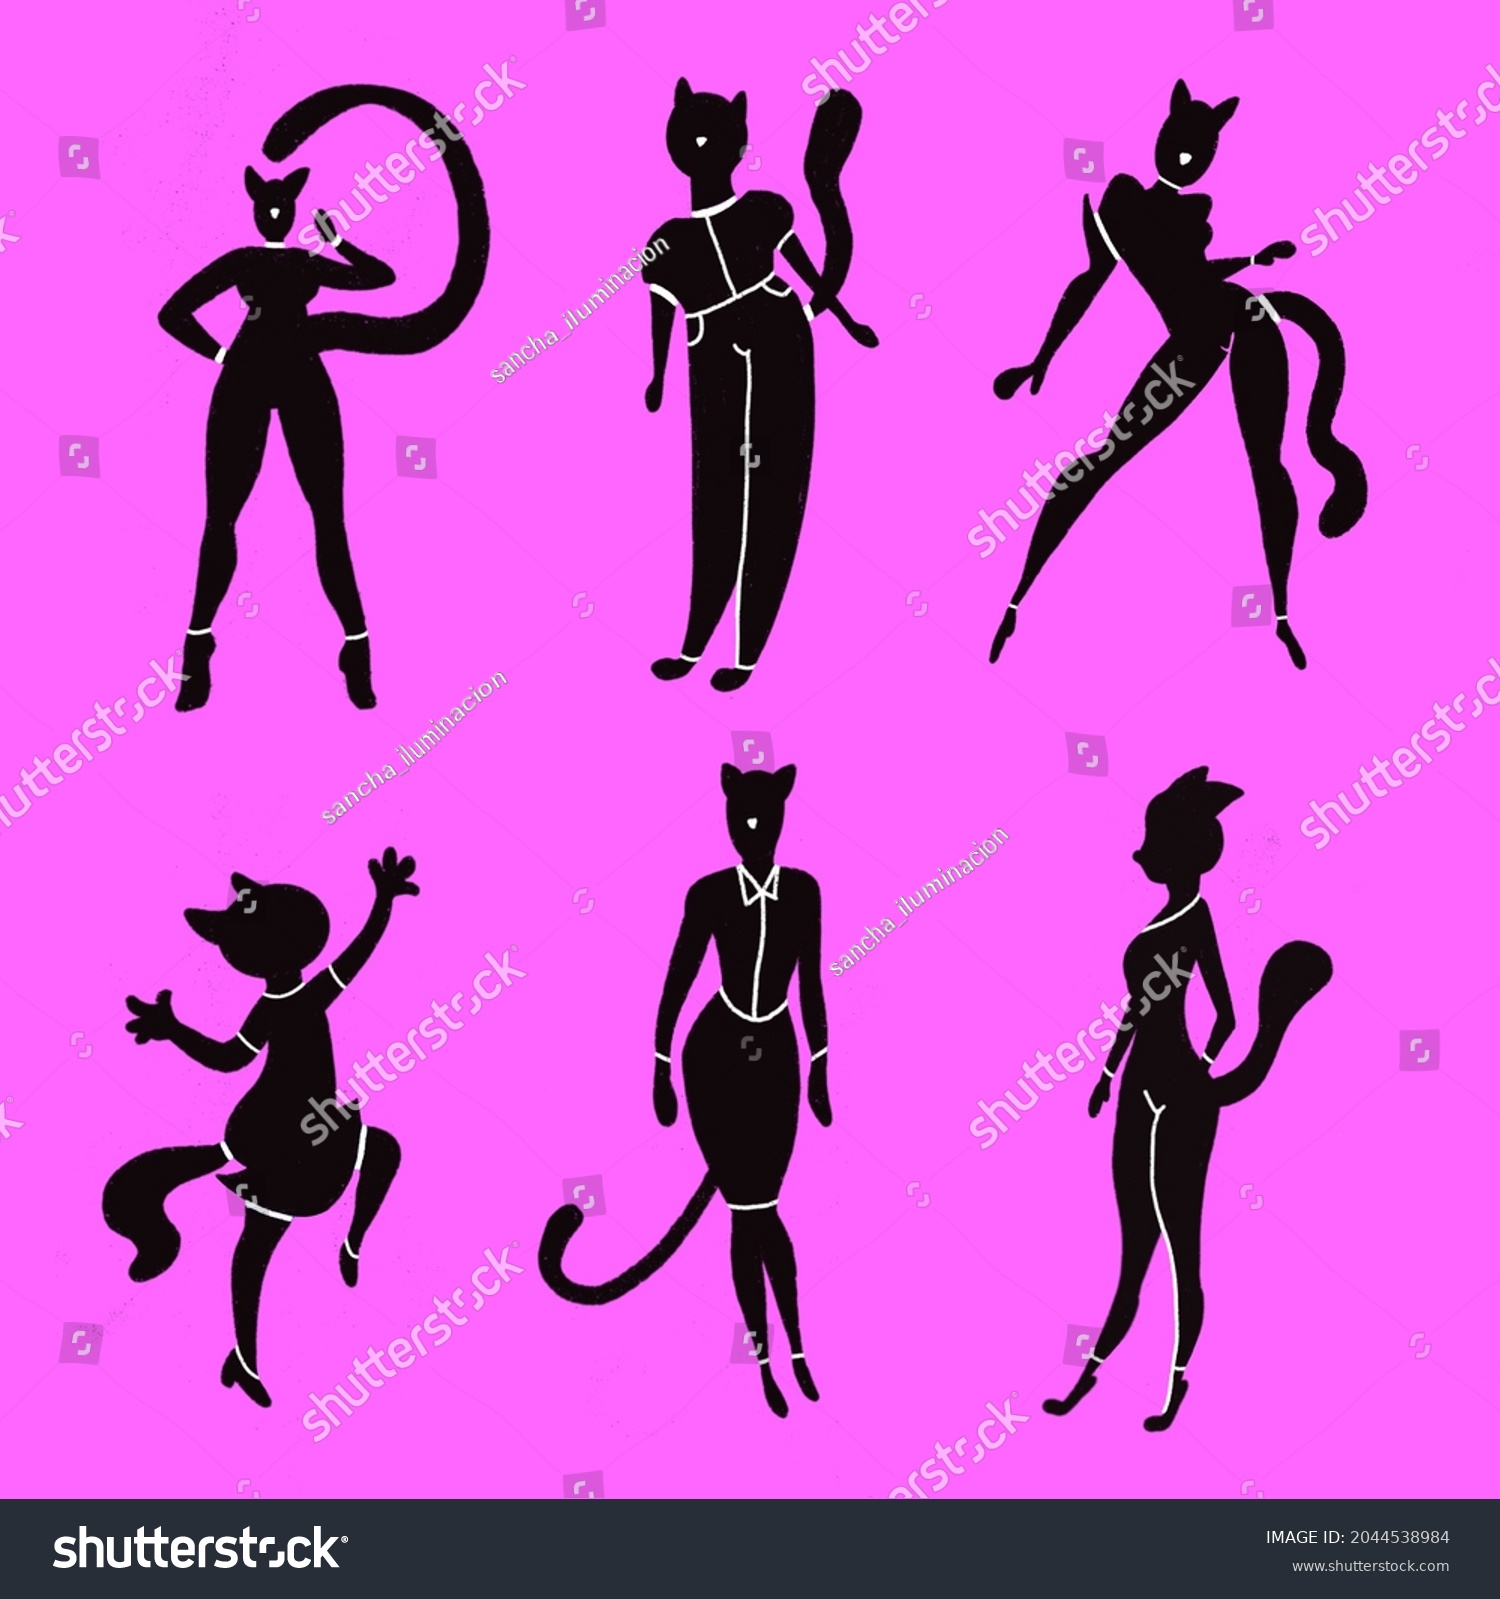 Cat Silhouettes Cute Cats Characters Stock Illustration 2044538984 Shutterstock